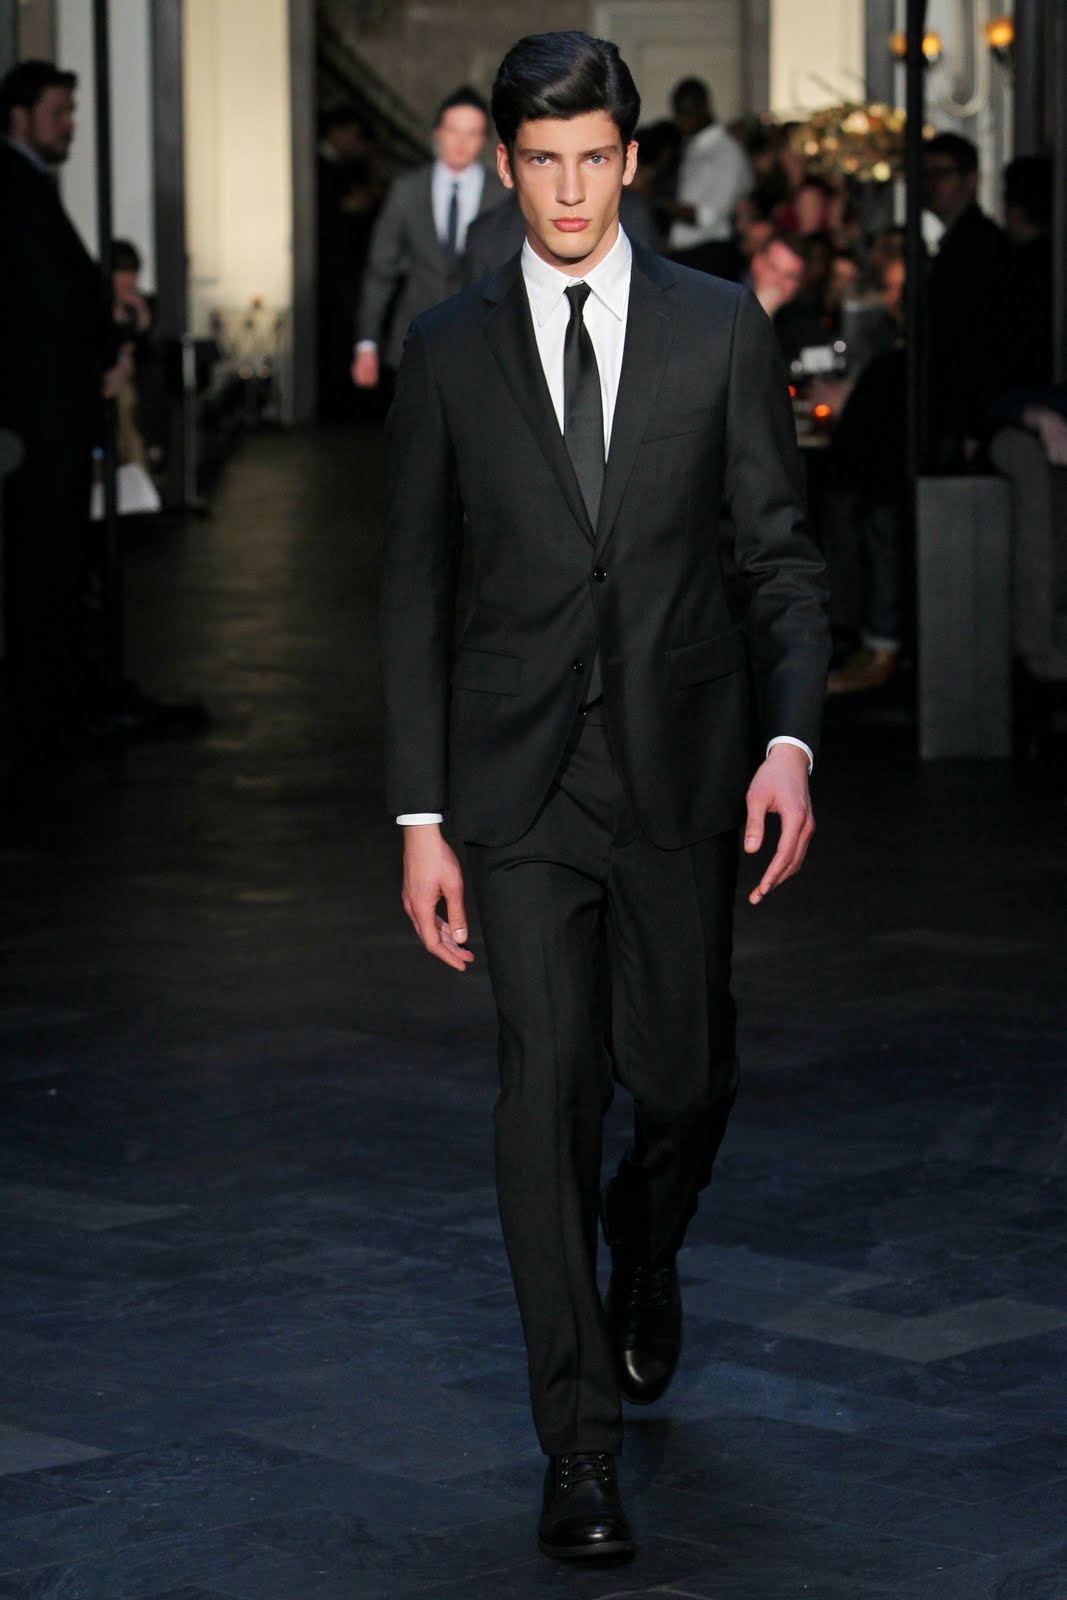 DKNY MEN'S Fall 2011 | Orange Juice and Biscuits